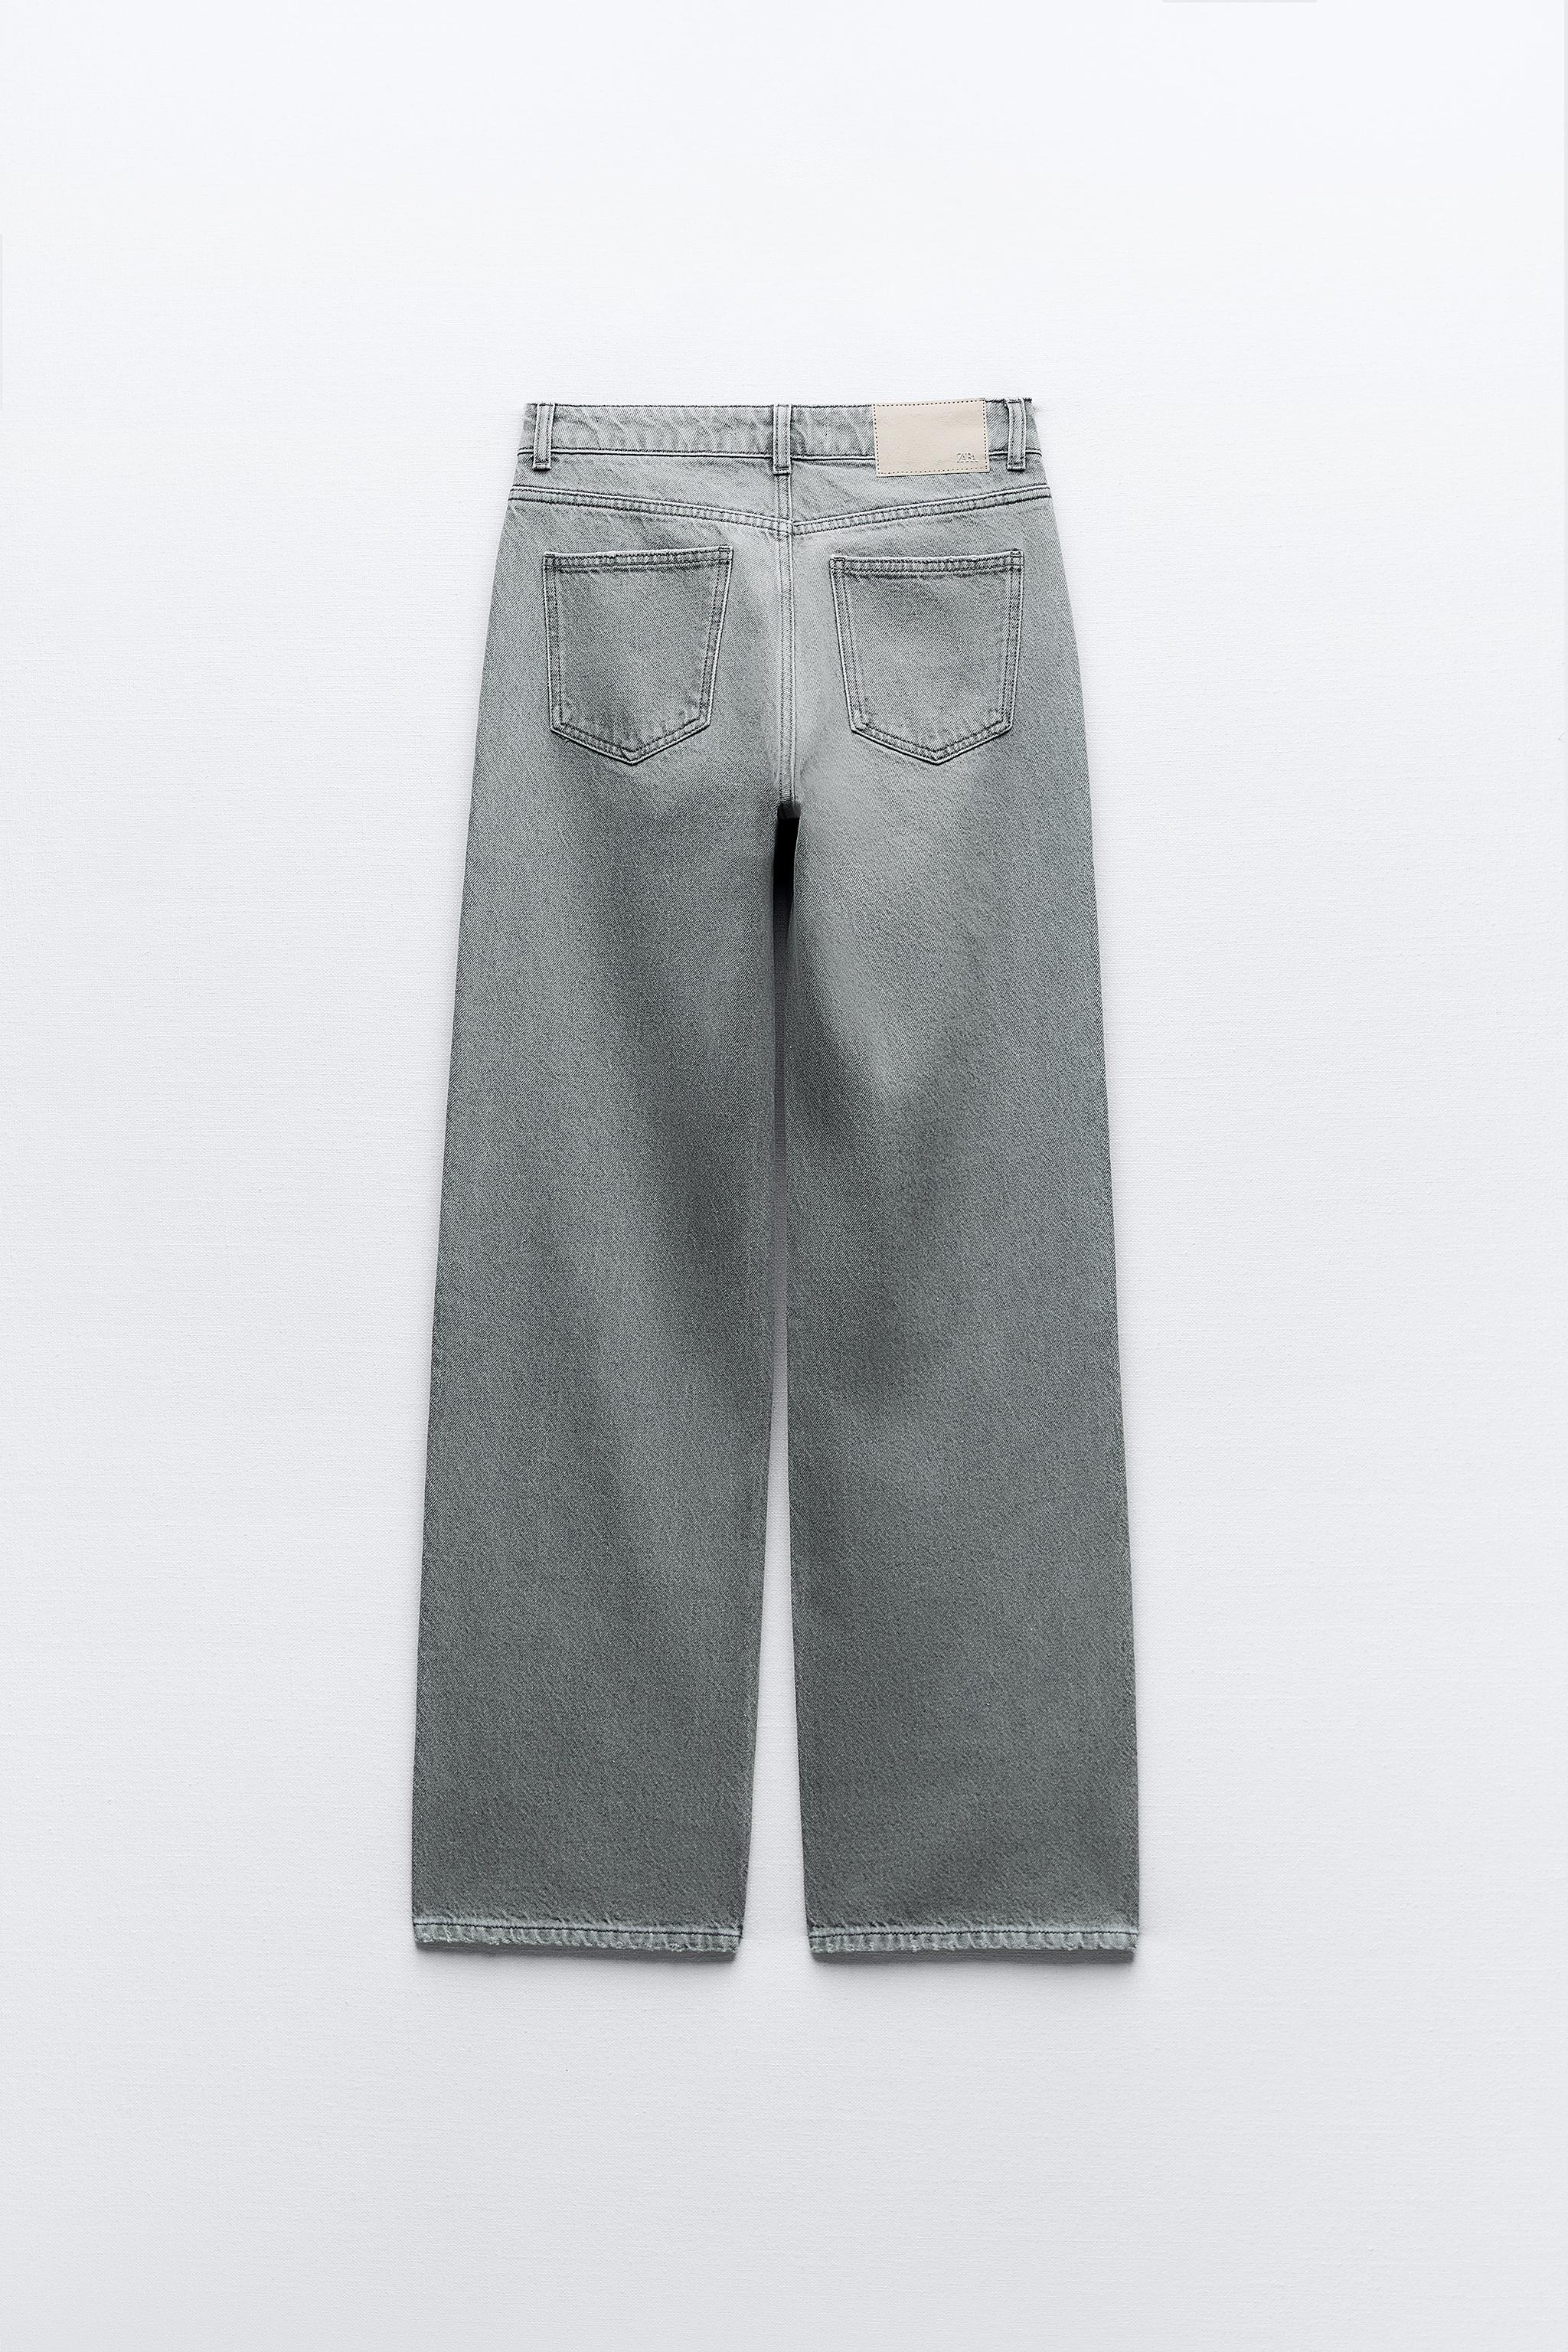 Z1975 MID RISE LONG LENGTH STRAIGHT CUT JEANS